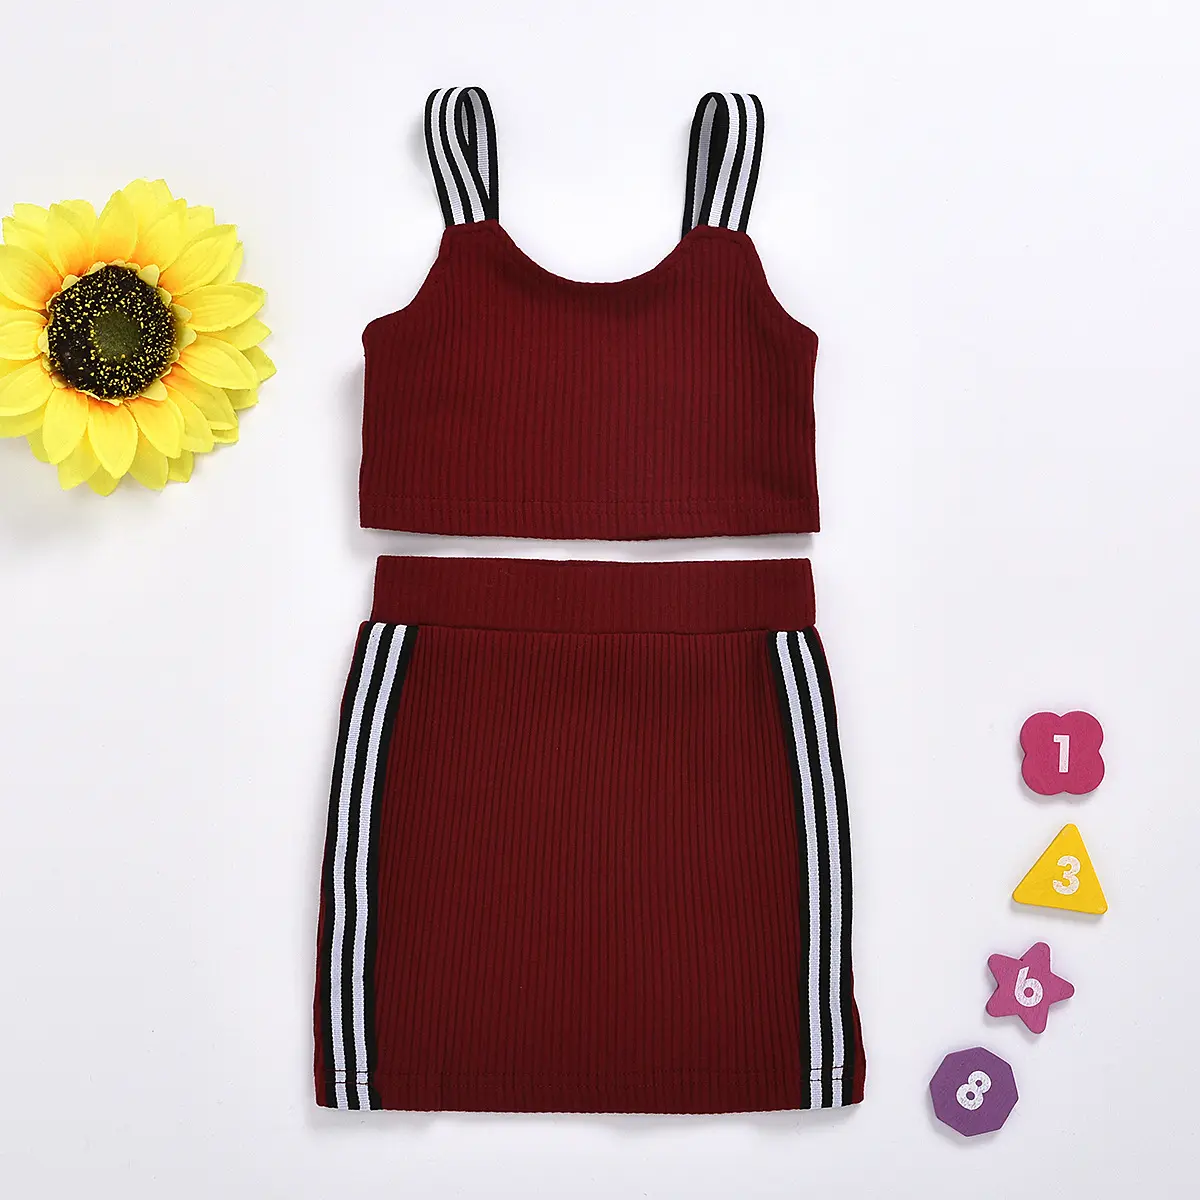 2021 INS Summer Kids Clothes Baby Girls Knit 2 Piece Skirts Set Toddler Girls Outfit Vest Crops Sweater Sets